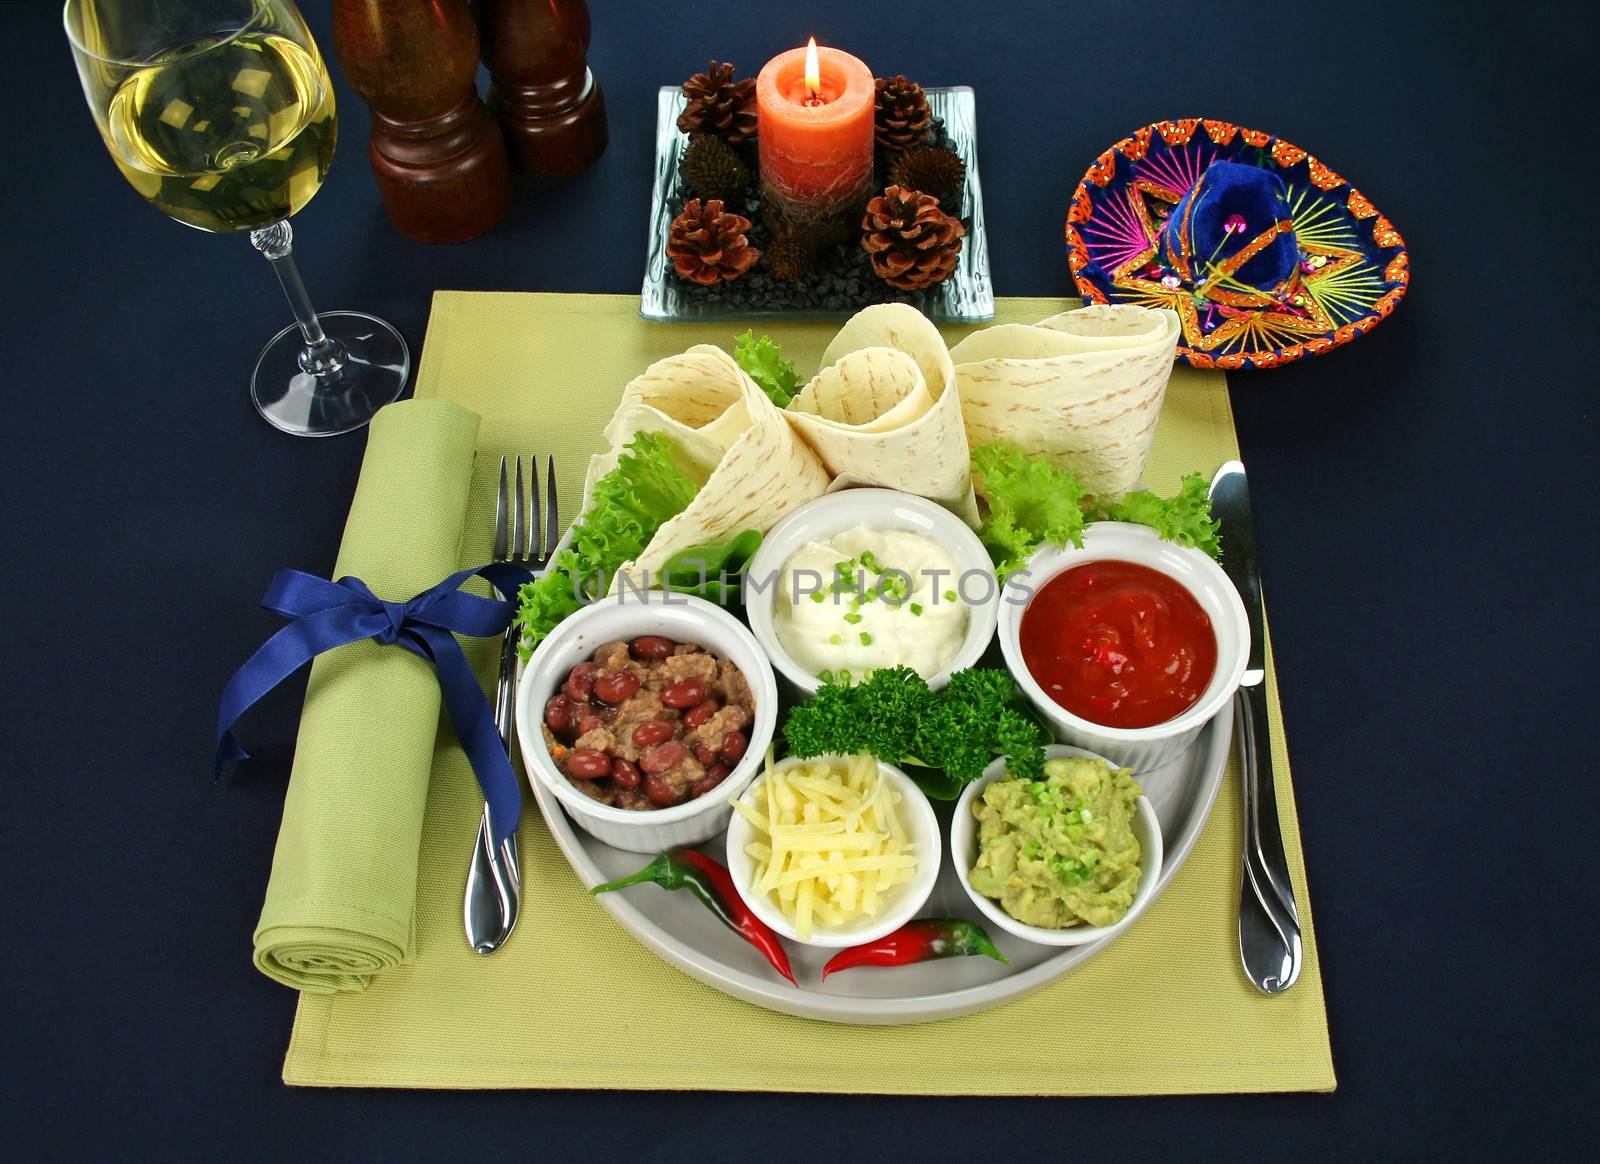 Mexican vegetarian platter with tortillas, guacamole, refried beans, cheese, sour cream and tomato salsa,